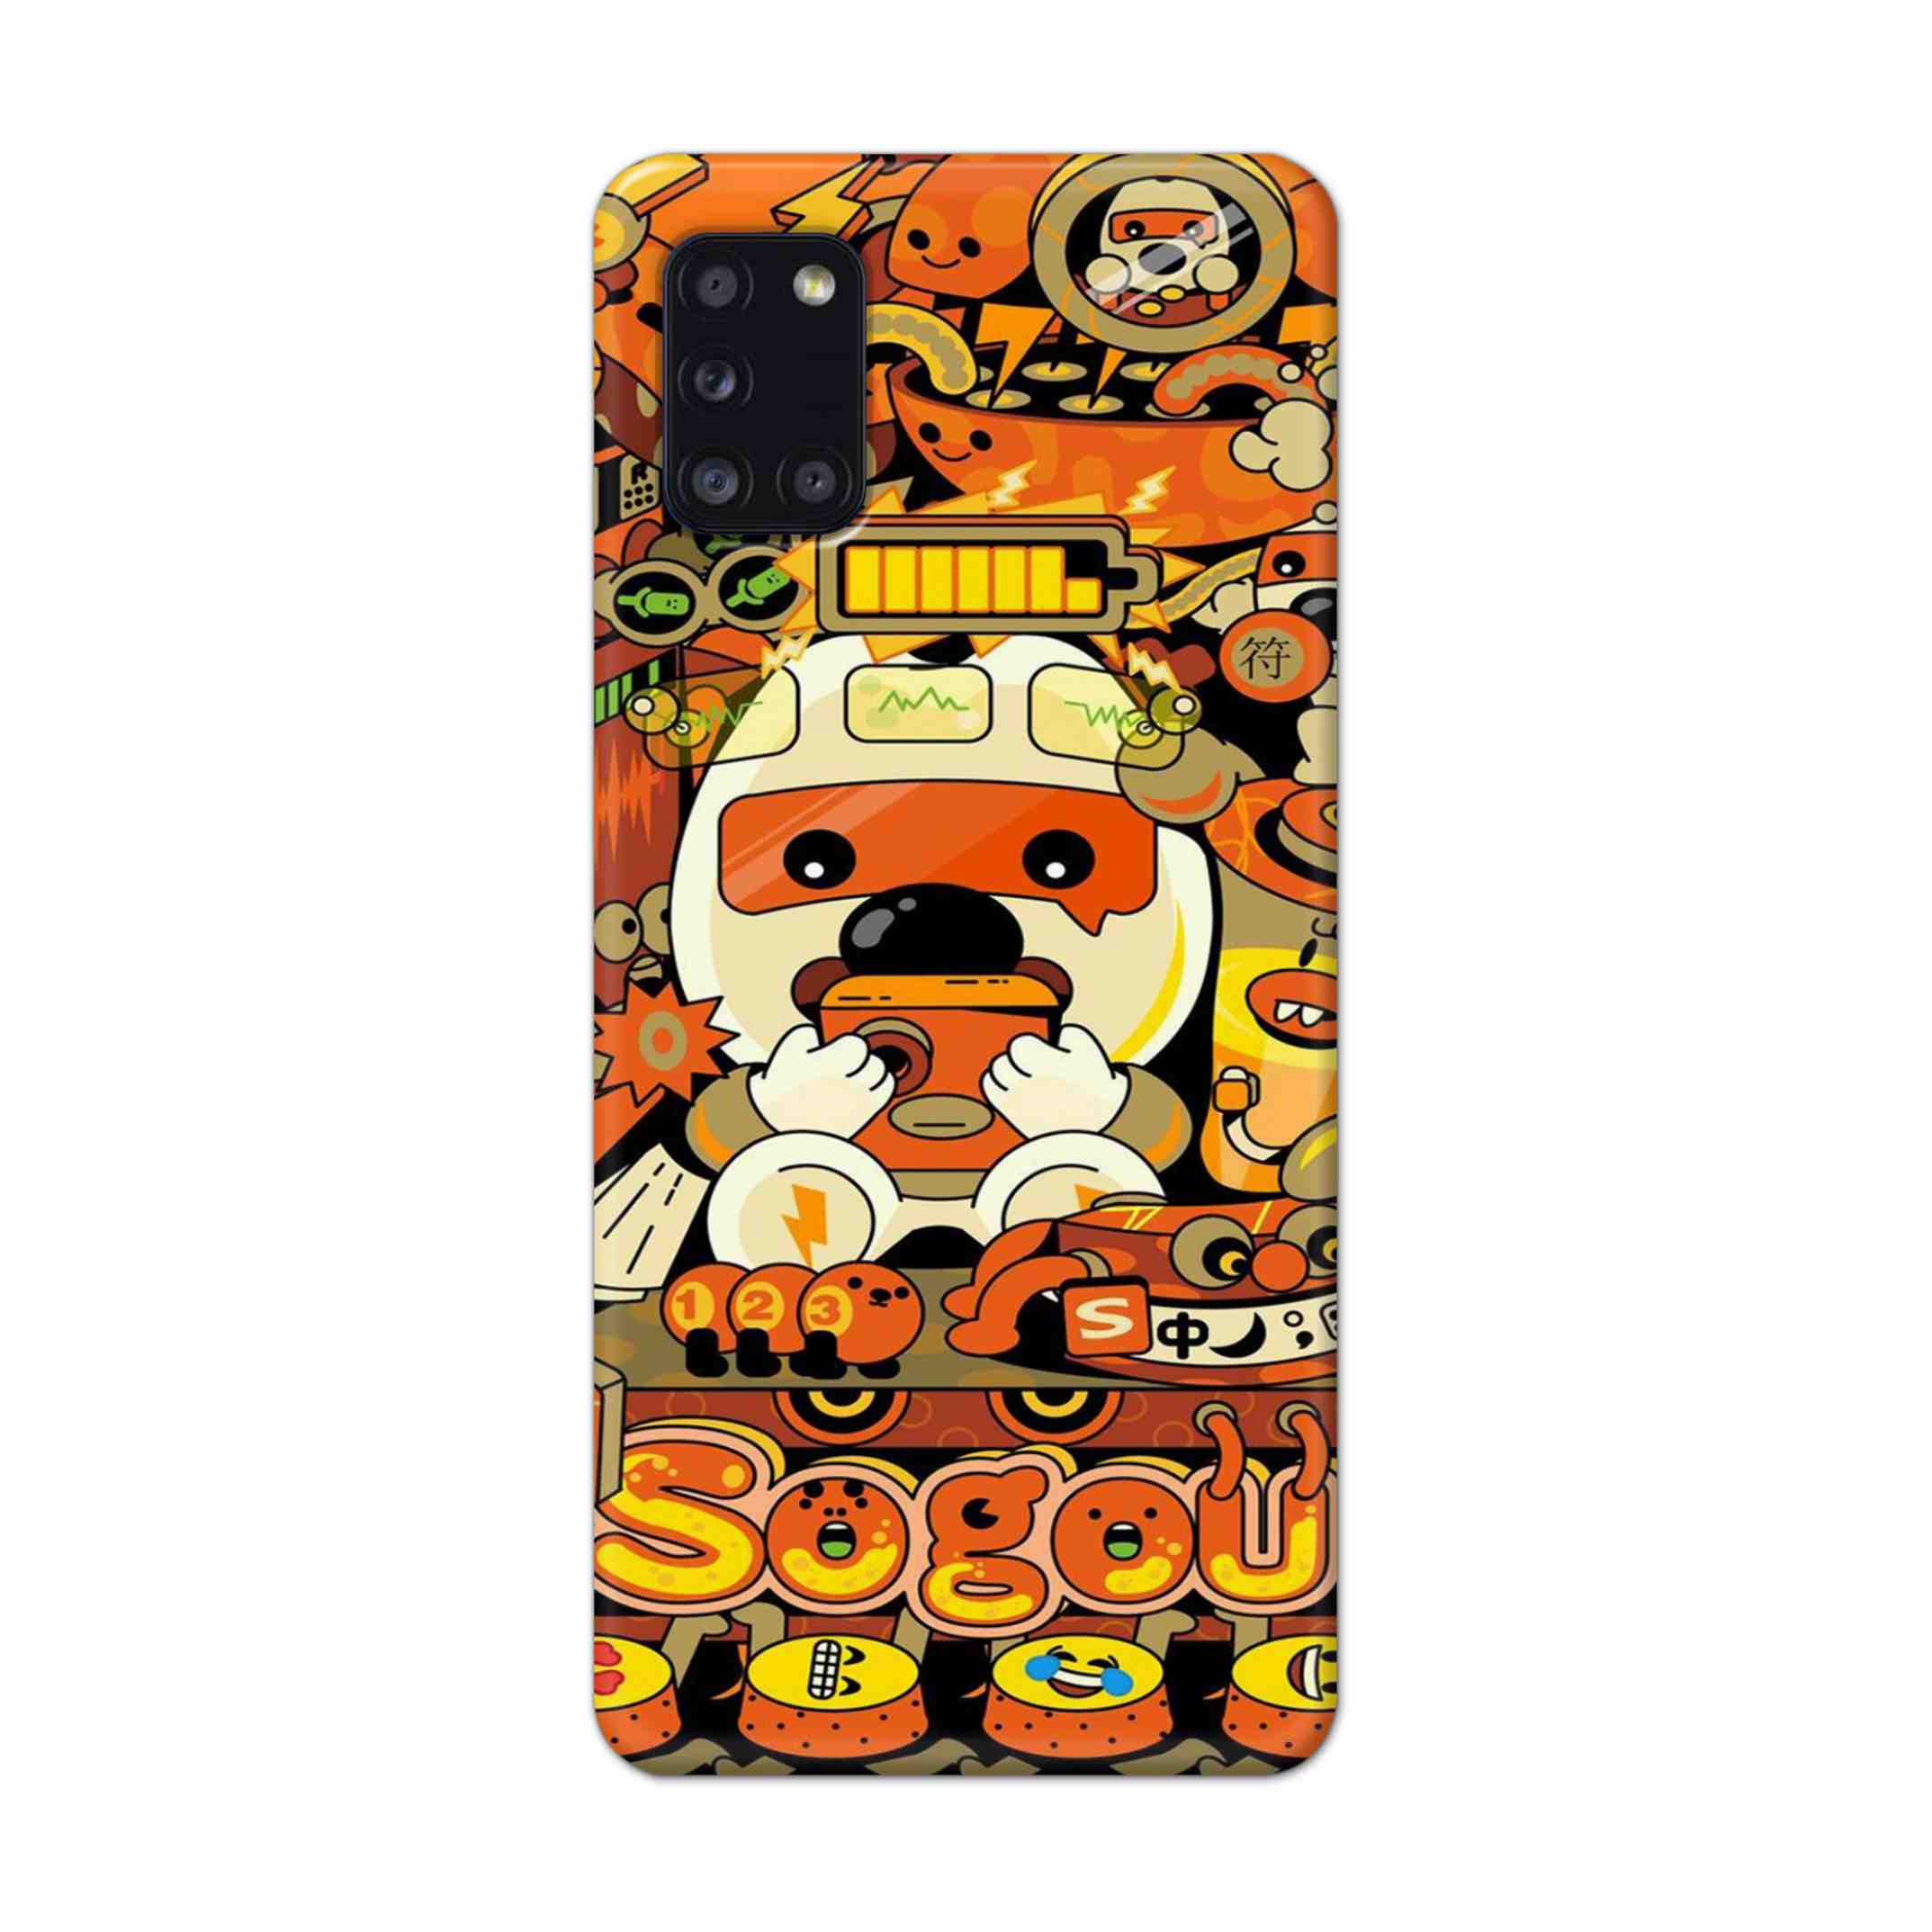 Buy Sogou Hard Back Mobile Phone Case Cover For Samsung Galaxy A31 Online